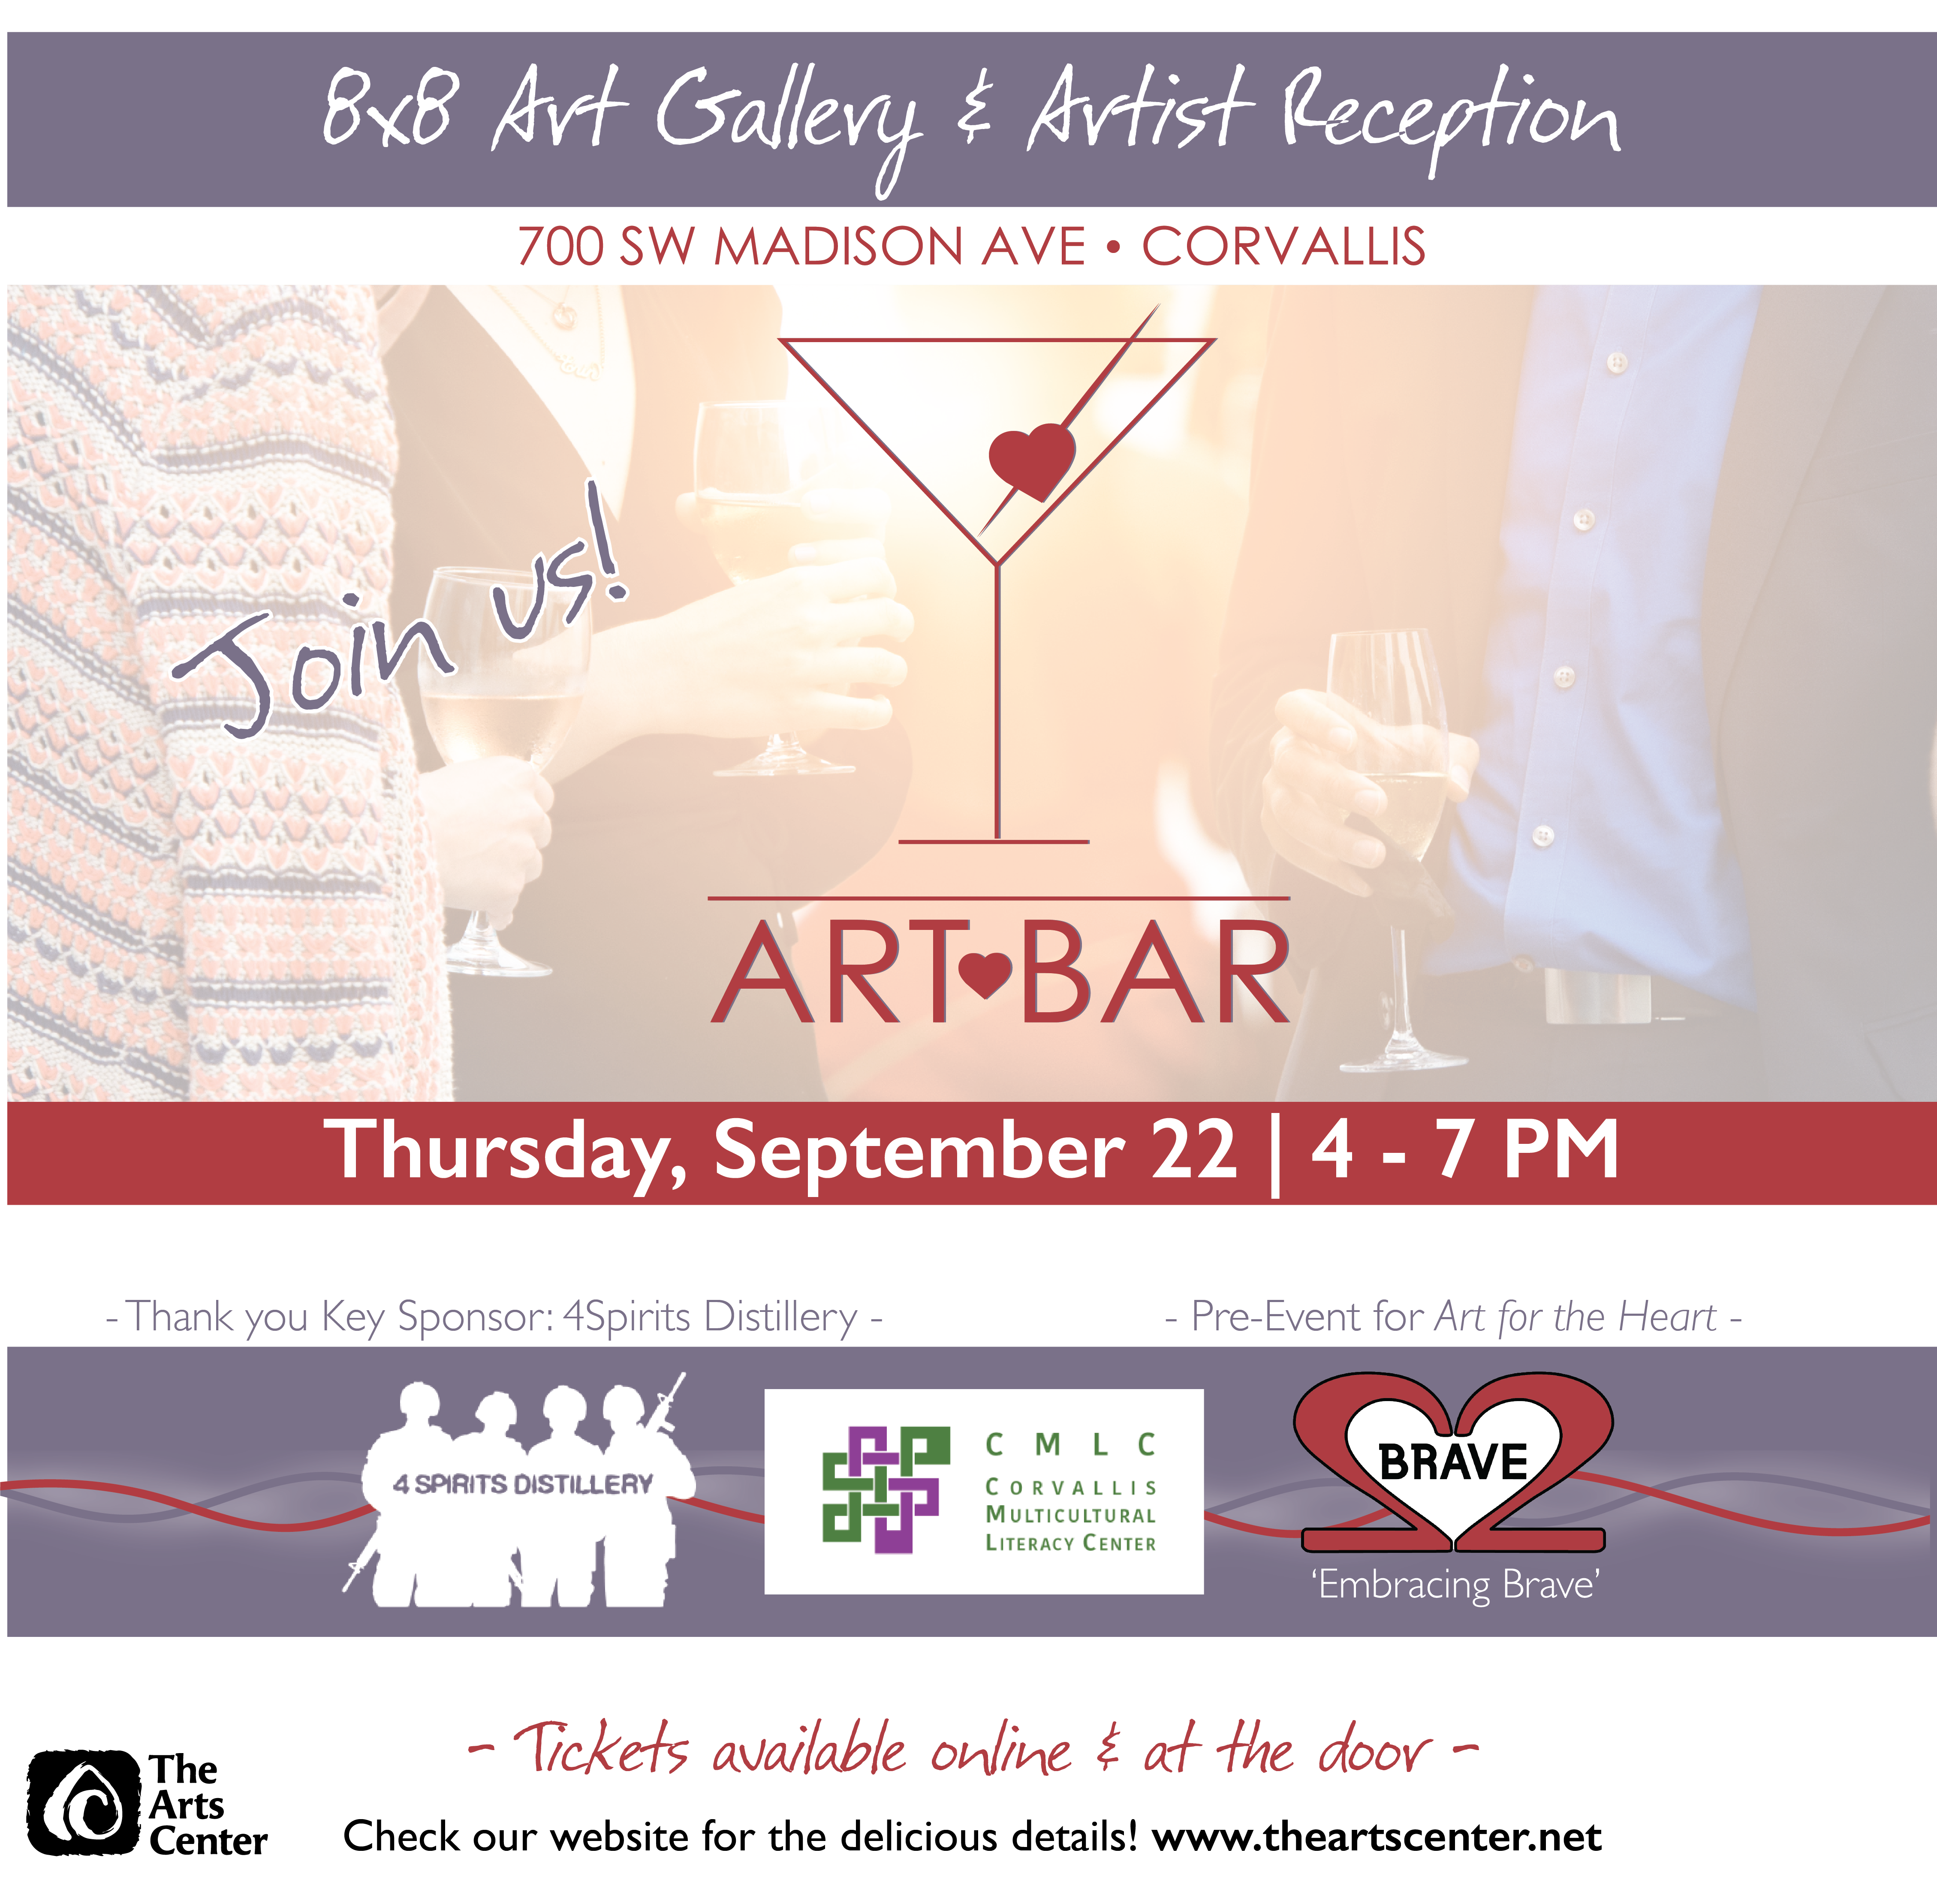 graphic for ArtBar event at The Arts Center